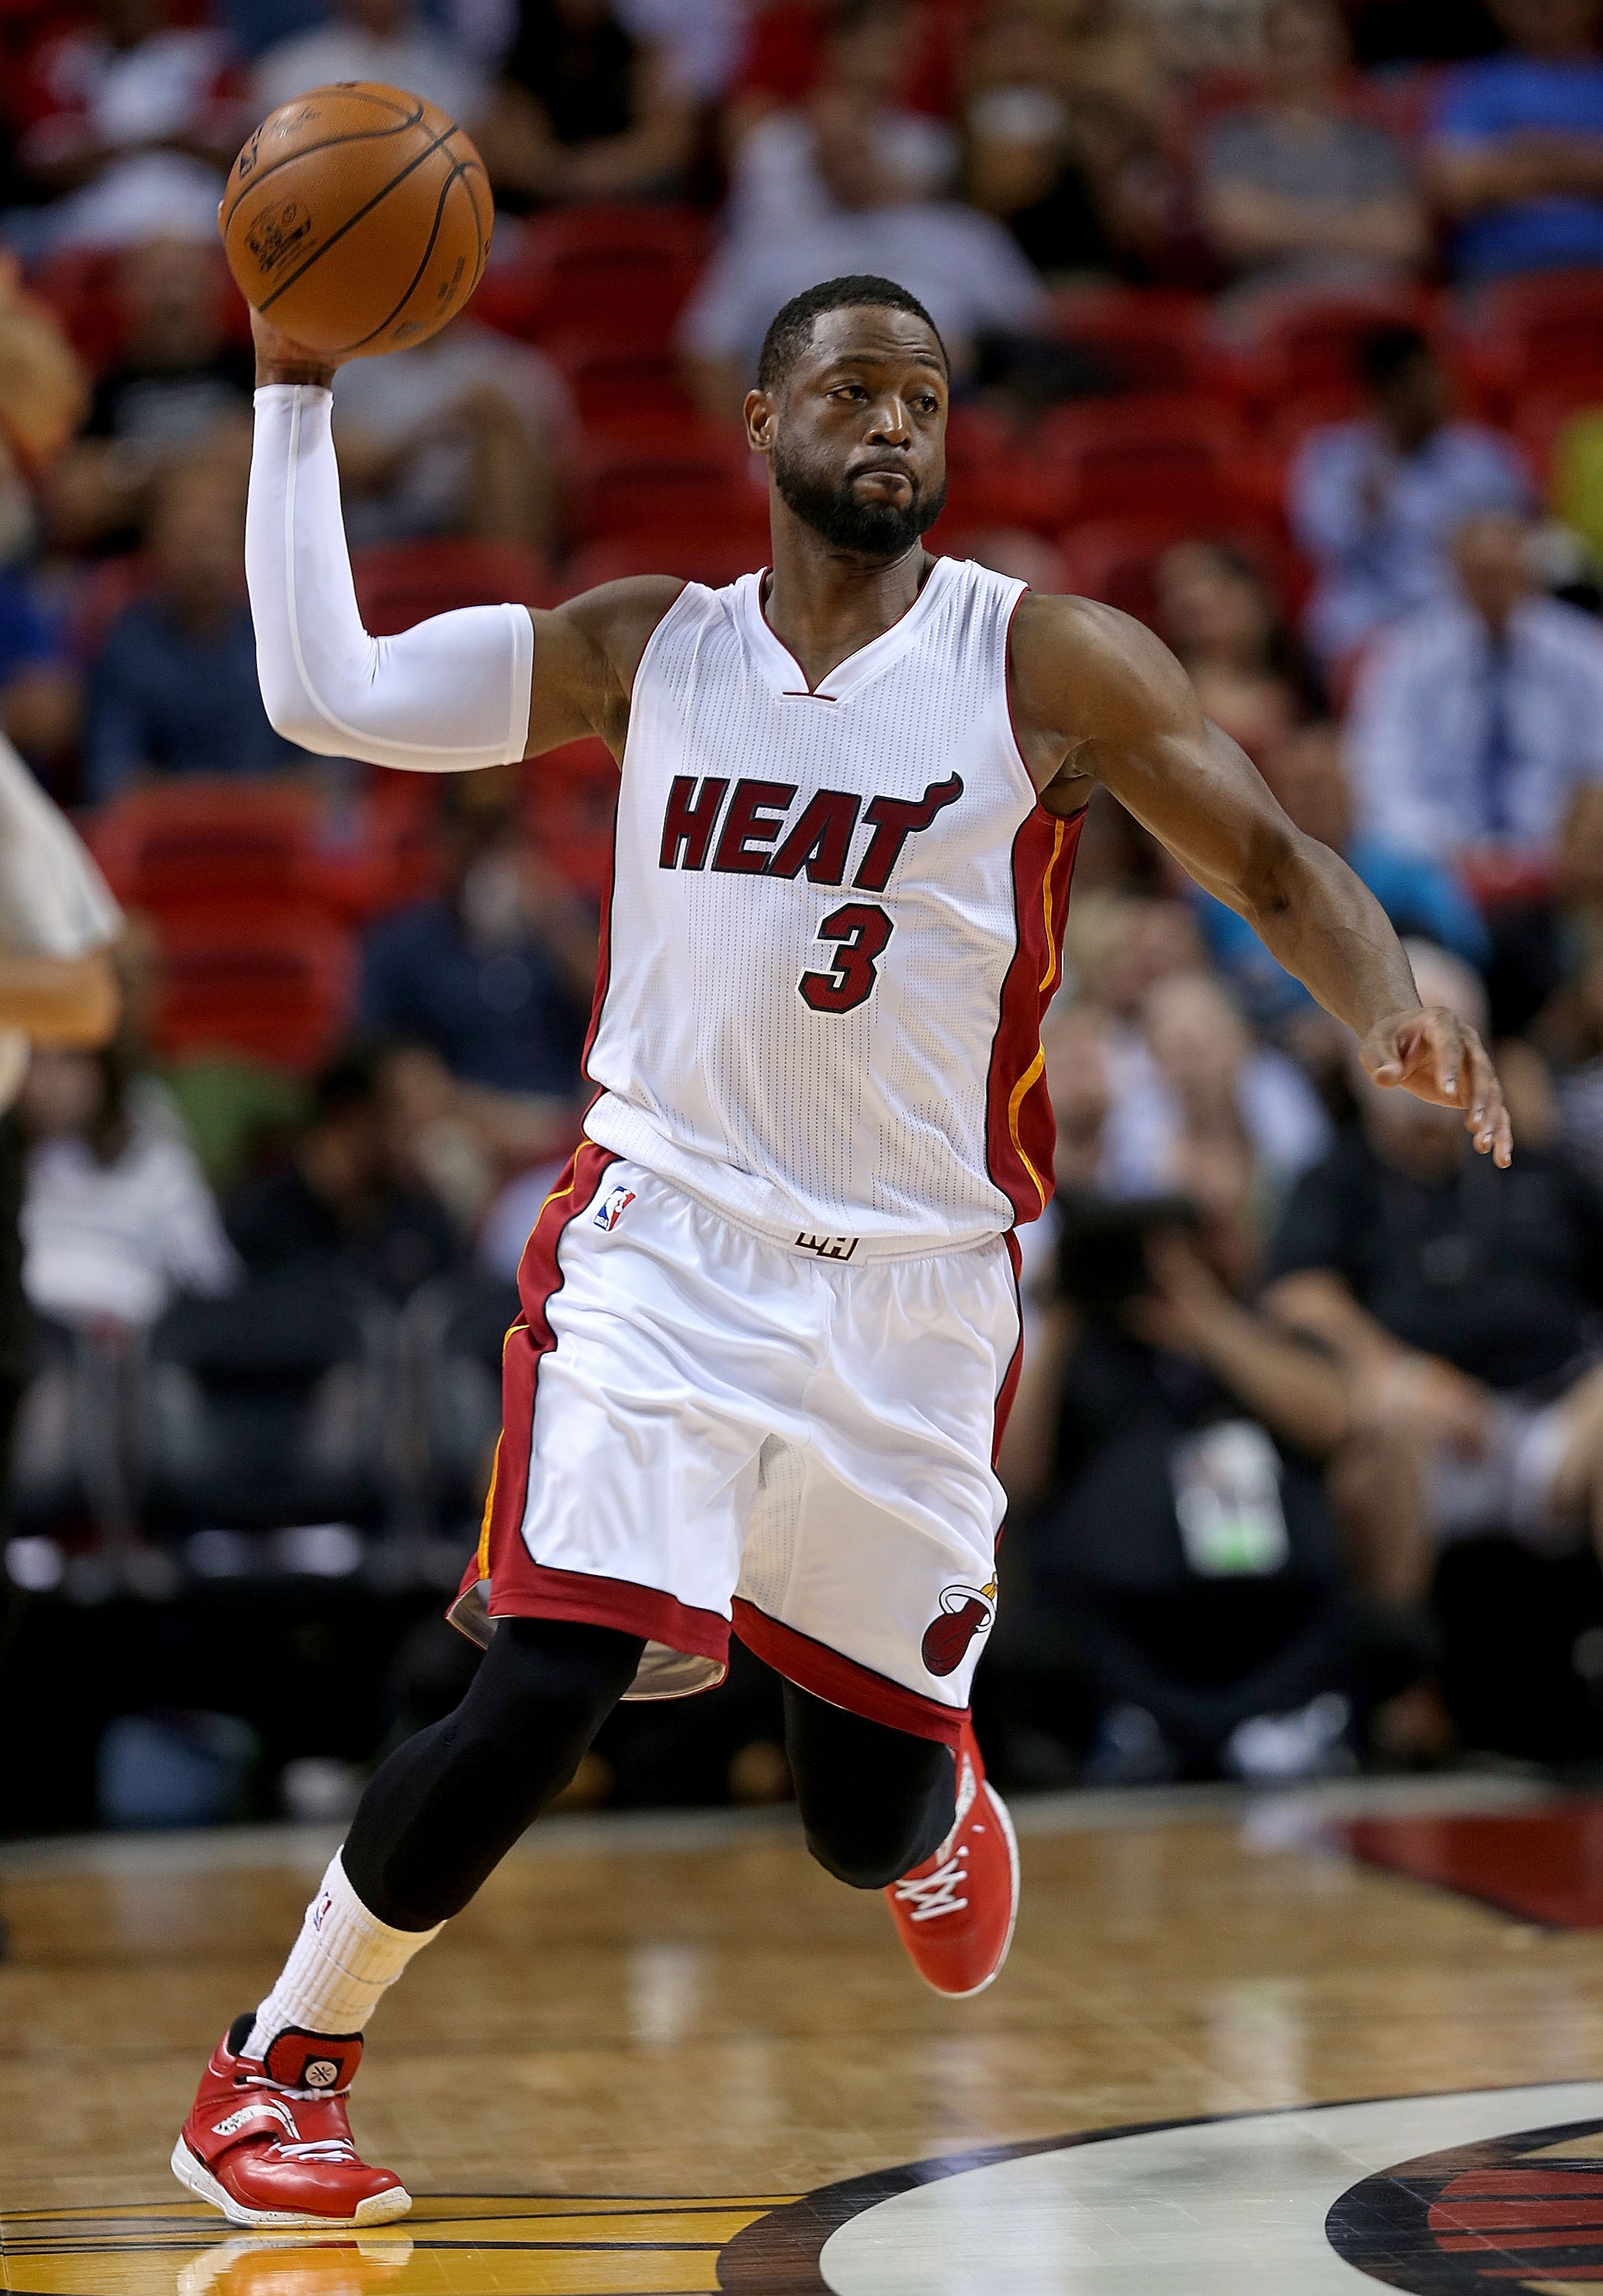 MIAMI, FL - APRIL 13: Dwyane Wade #3 of the Miami Heat passes during a game against the Orlando Magic at American Airlines Arena on April 13, 2015 in Miami, Florida. NOTE TO USER: User expressly acknowledges and agrees that, by downloading and/or using this photograph, user is consenting to the terms and conditions of the Getty Images License Agreement. Mandatory copyright notice: (Photo by Mike Ehrmann/Getty Images)